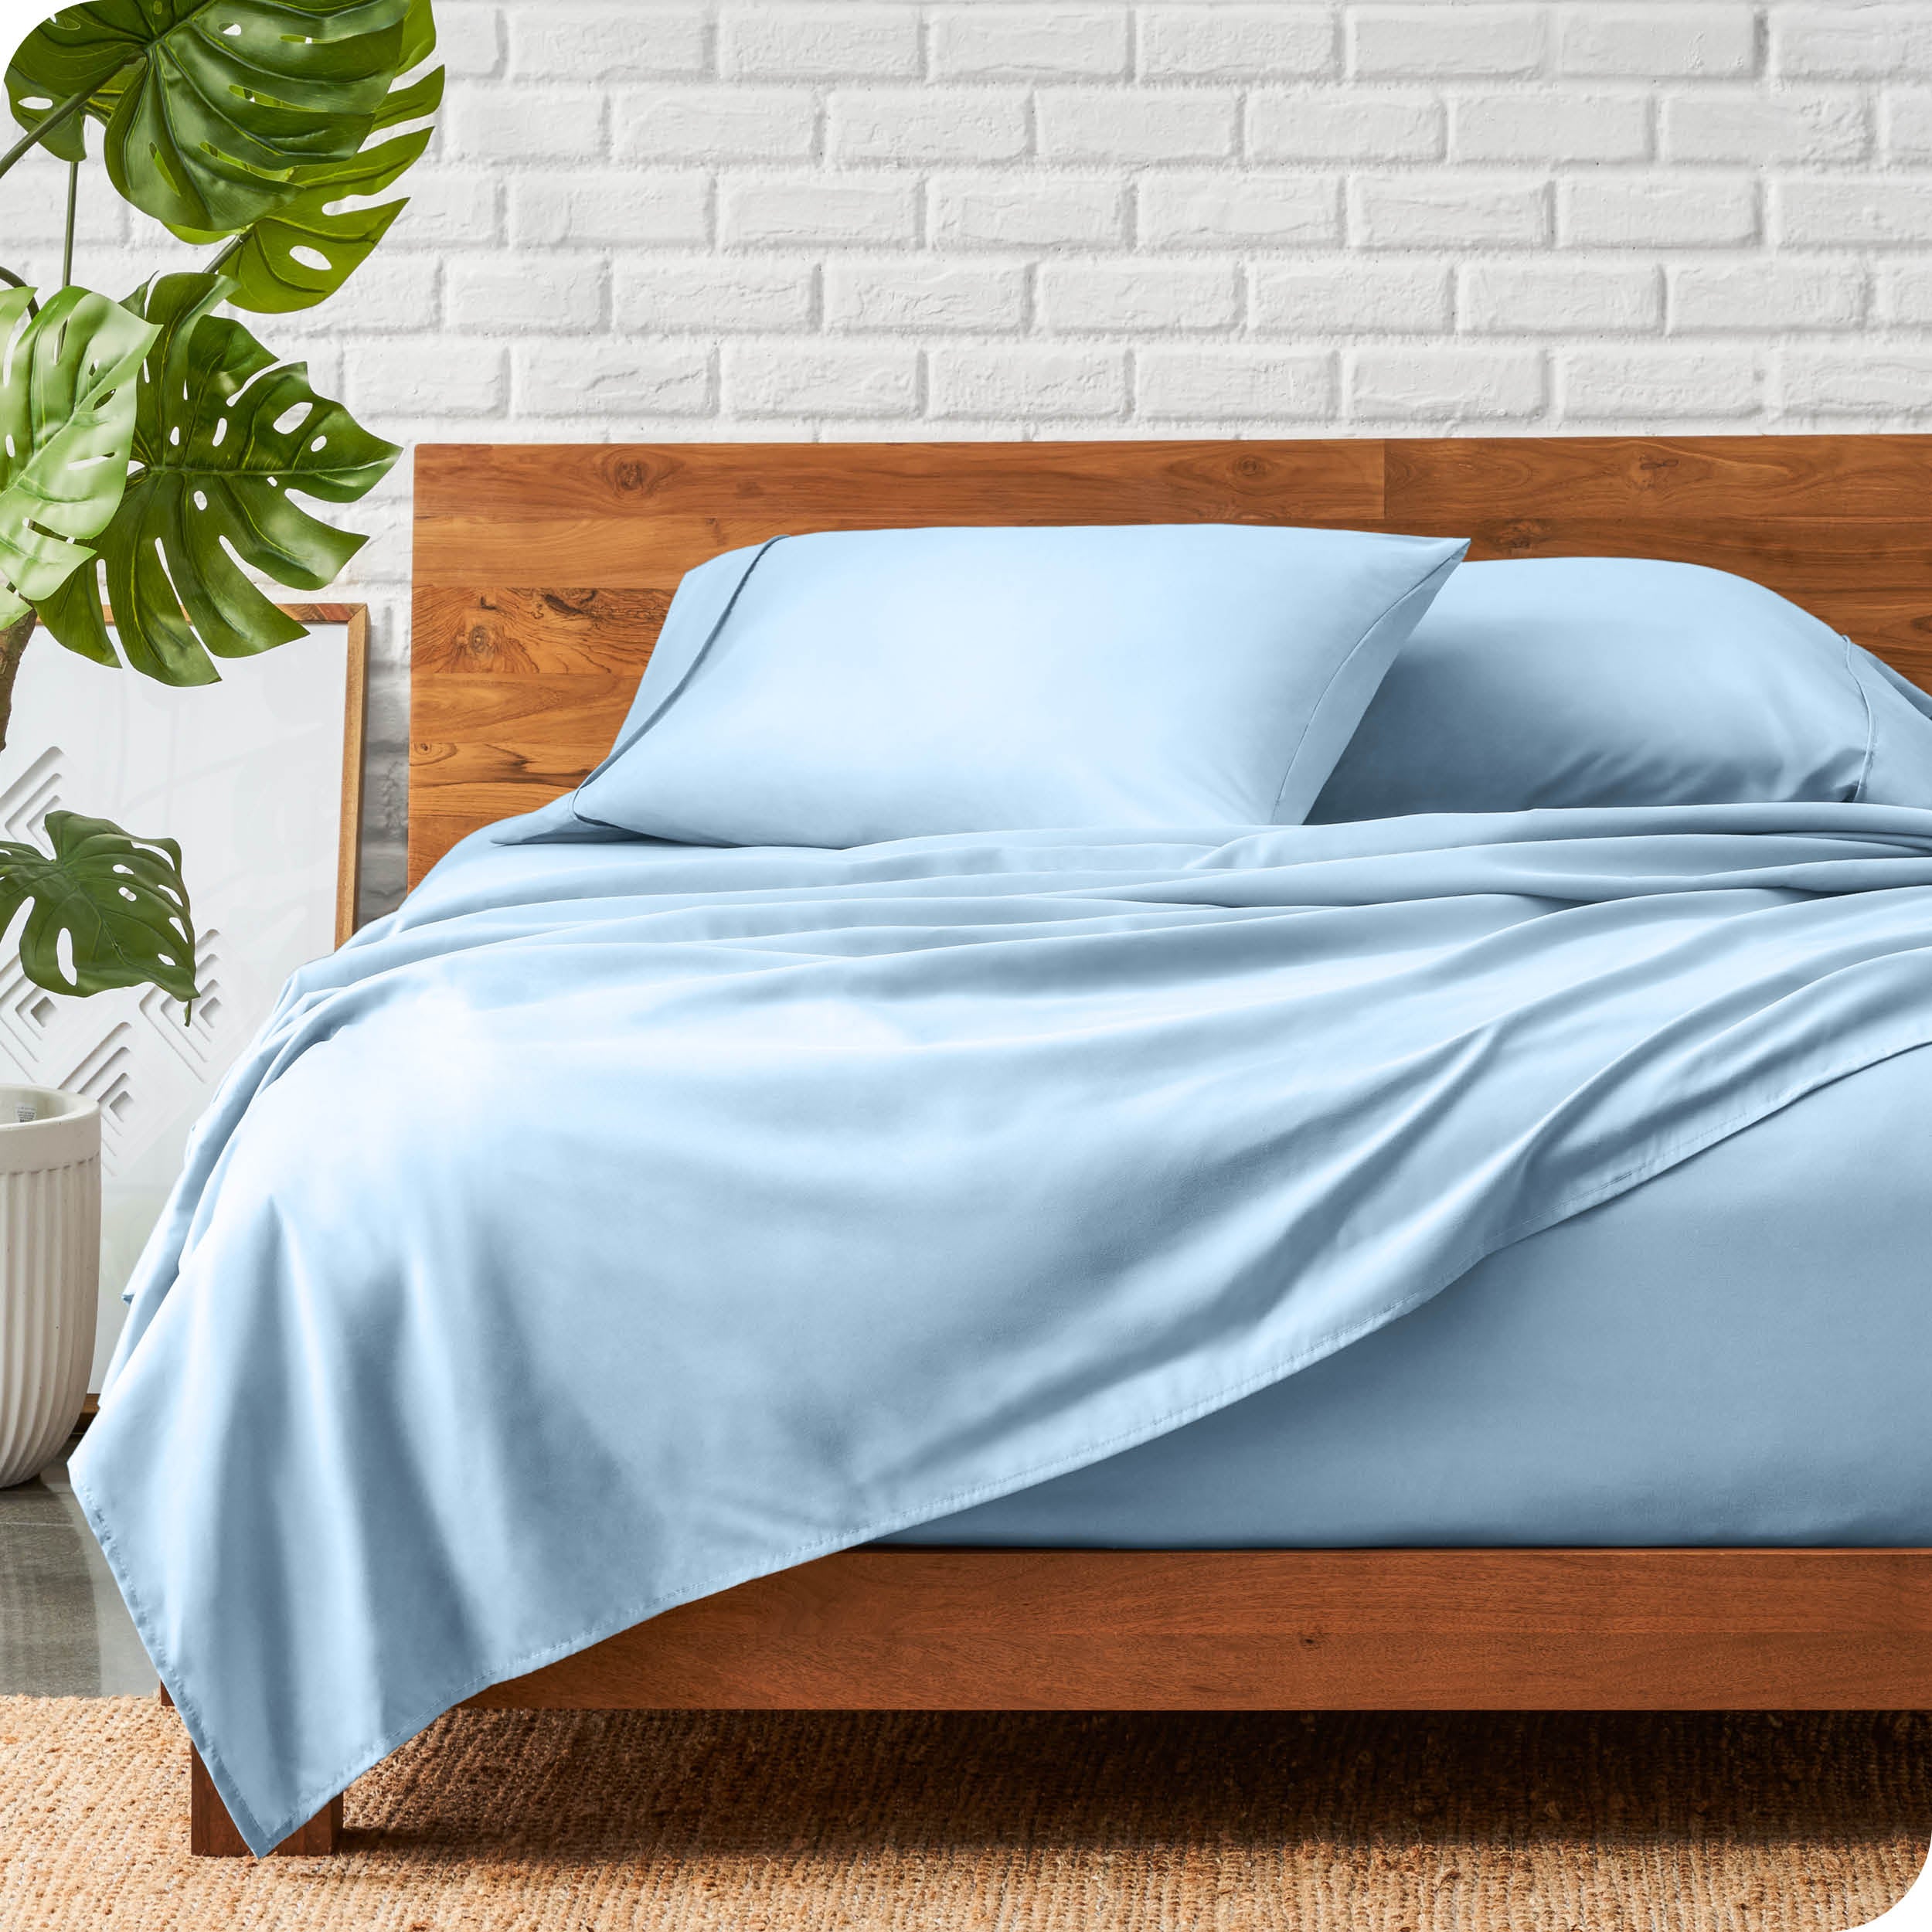 A wooden bed frame with a microfiber sheet set on the mattress.